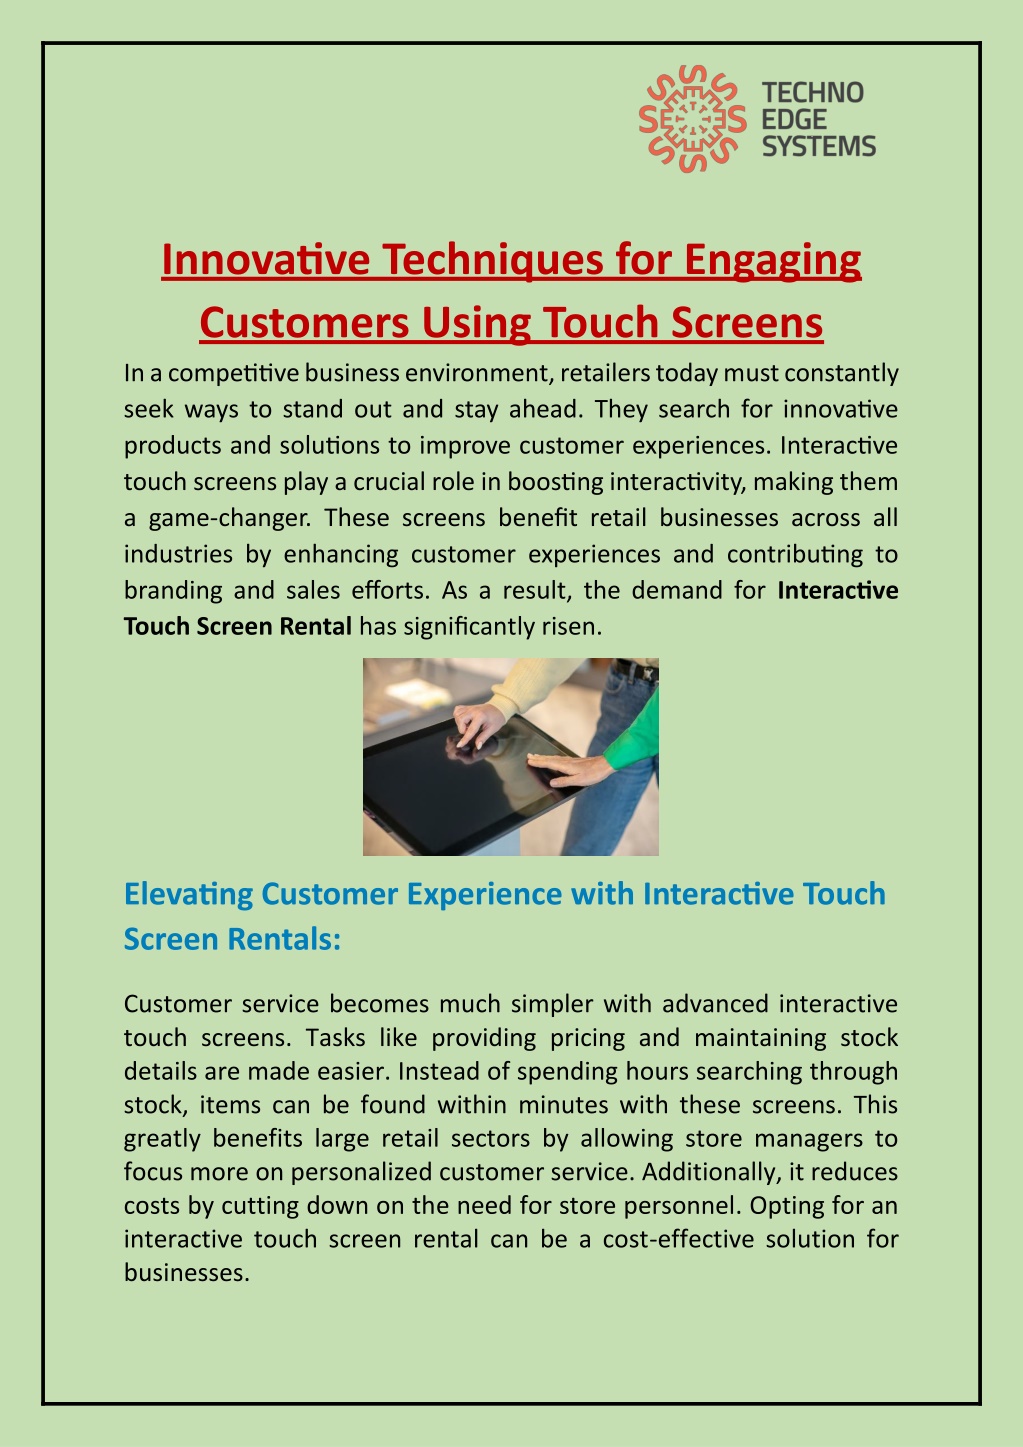 innovative techniques for engaging customers l.w